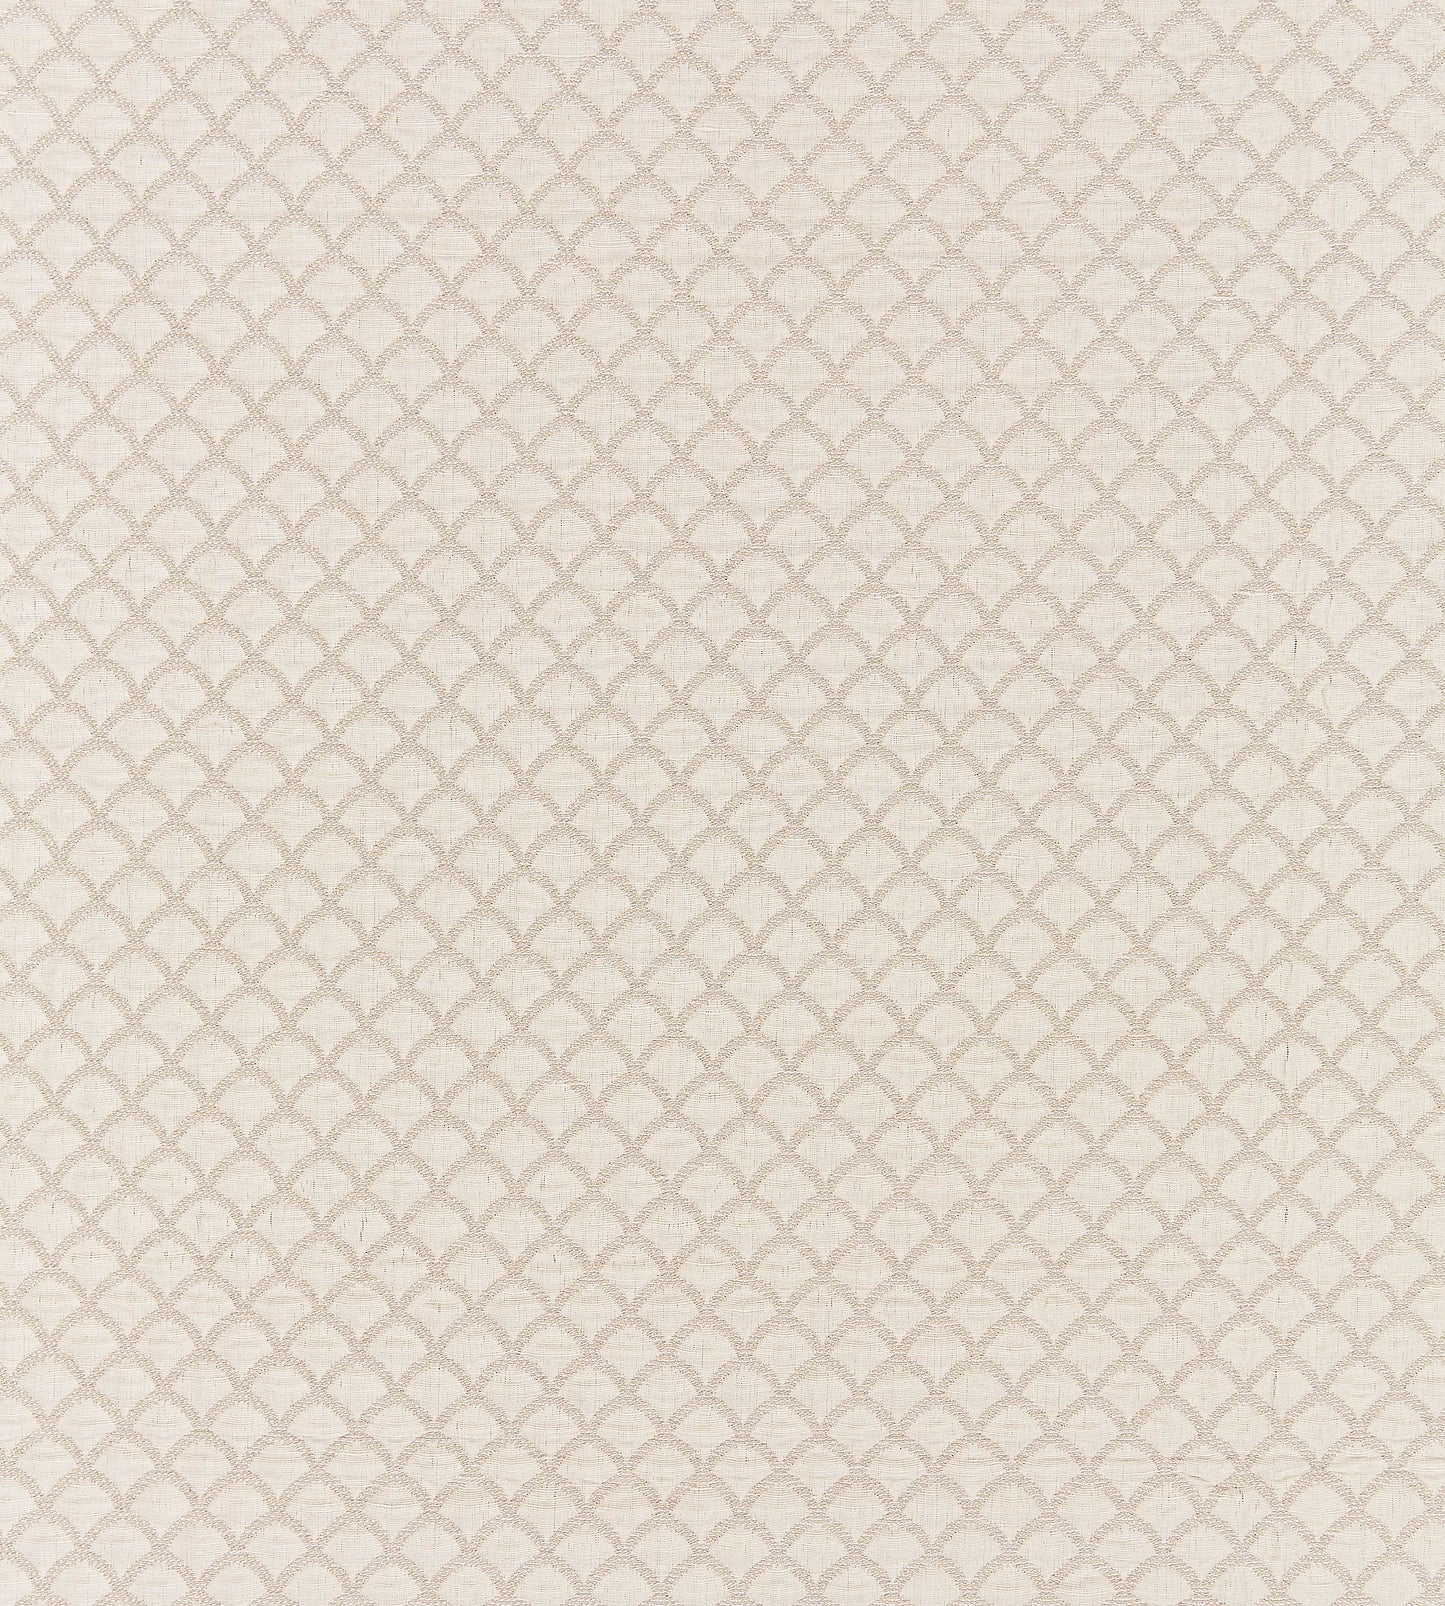 Purchase Scalamandre Fabric SKU SC 000127137, Scallop Weave Oyster 1